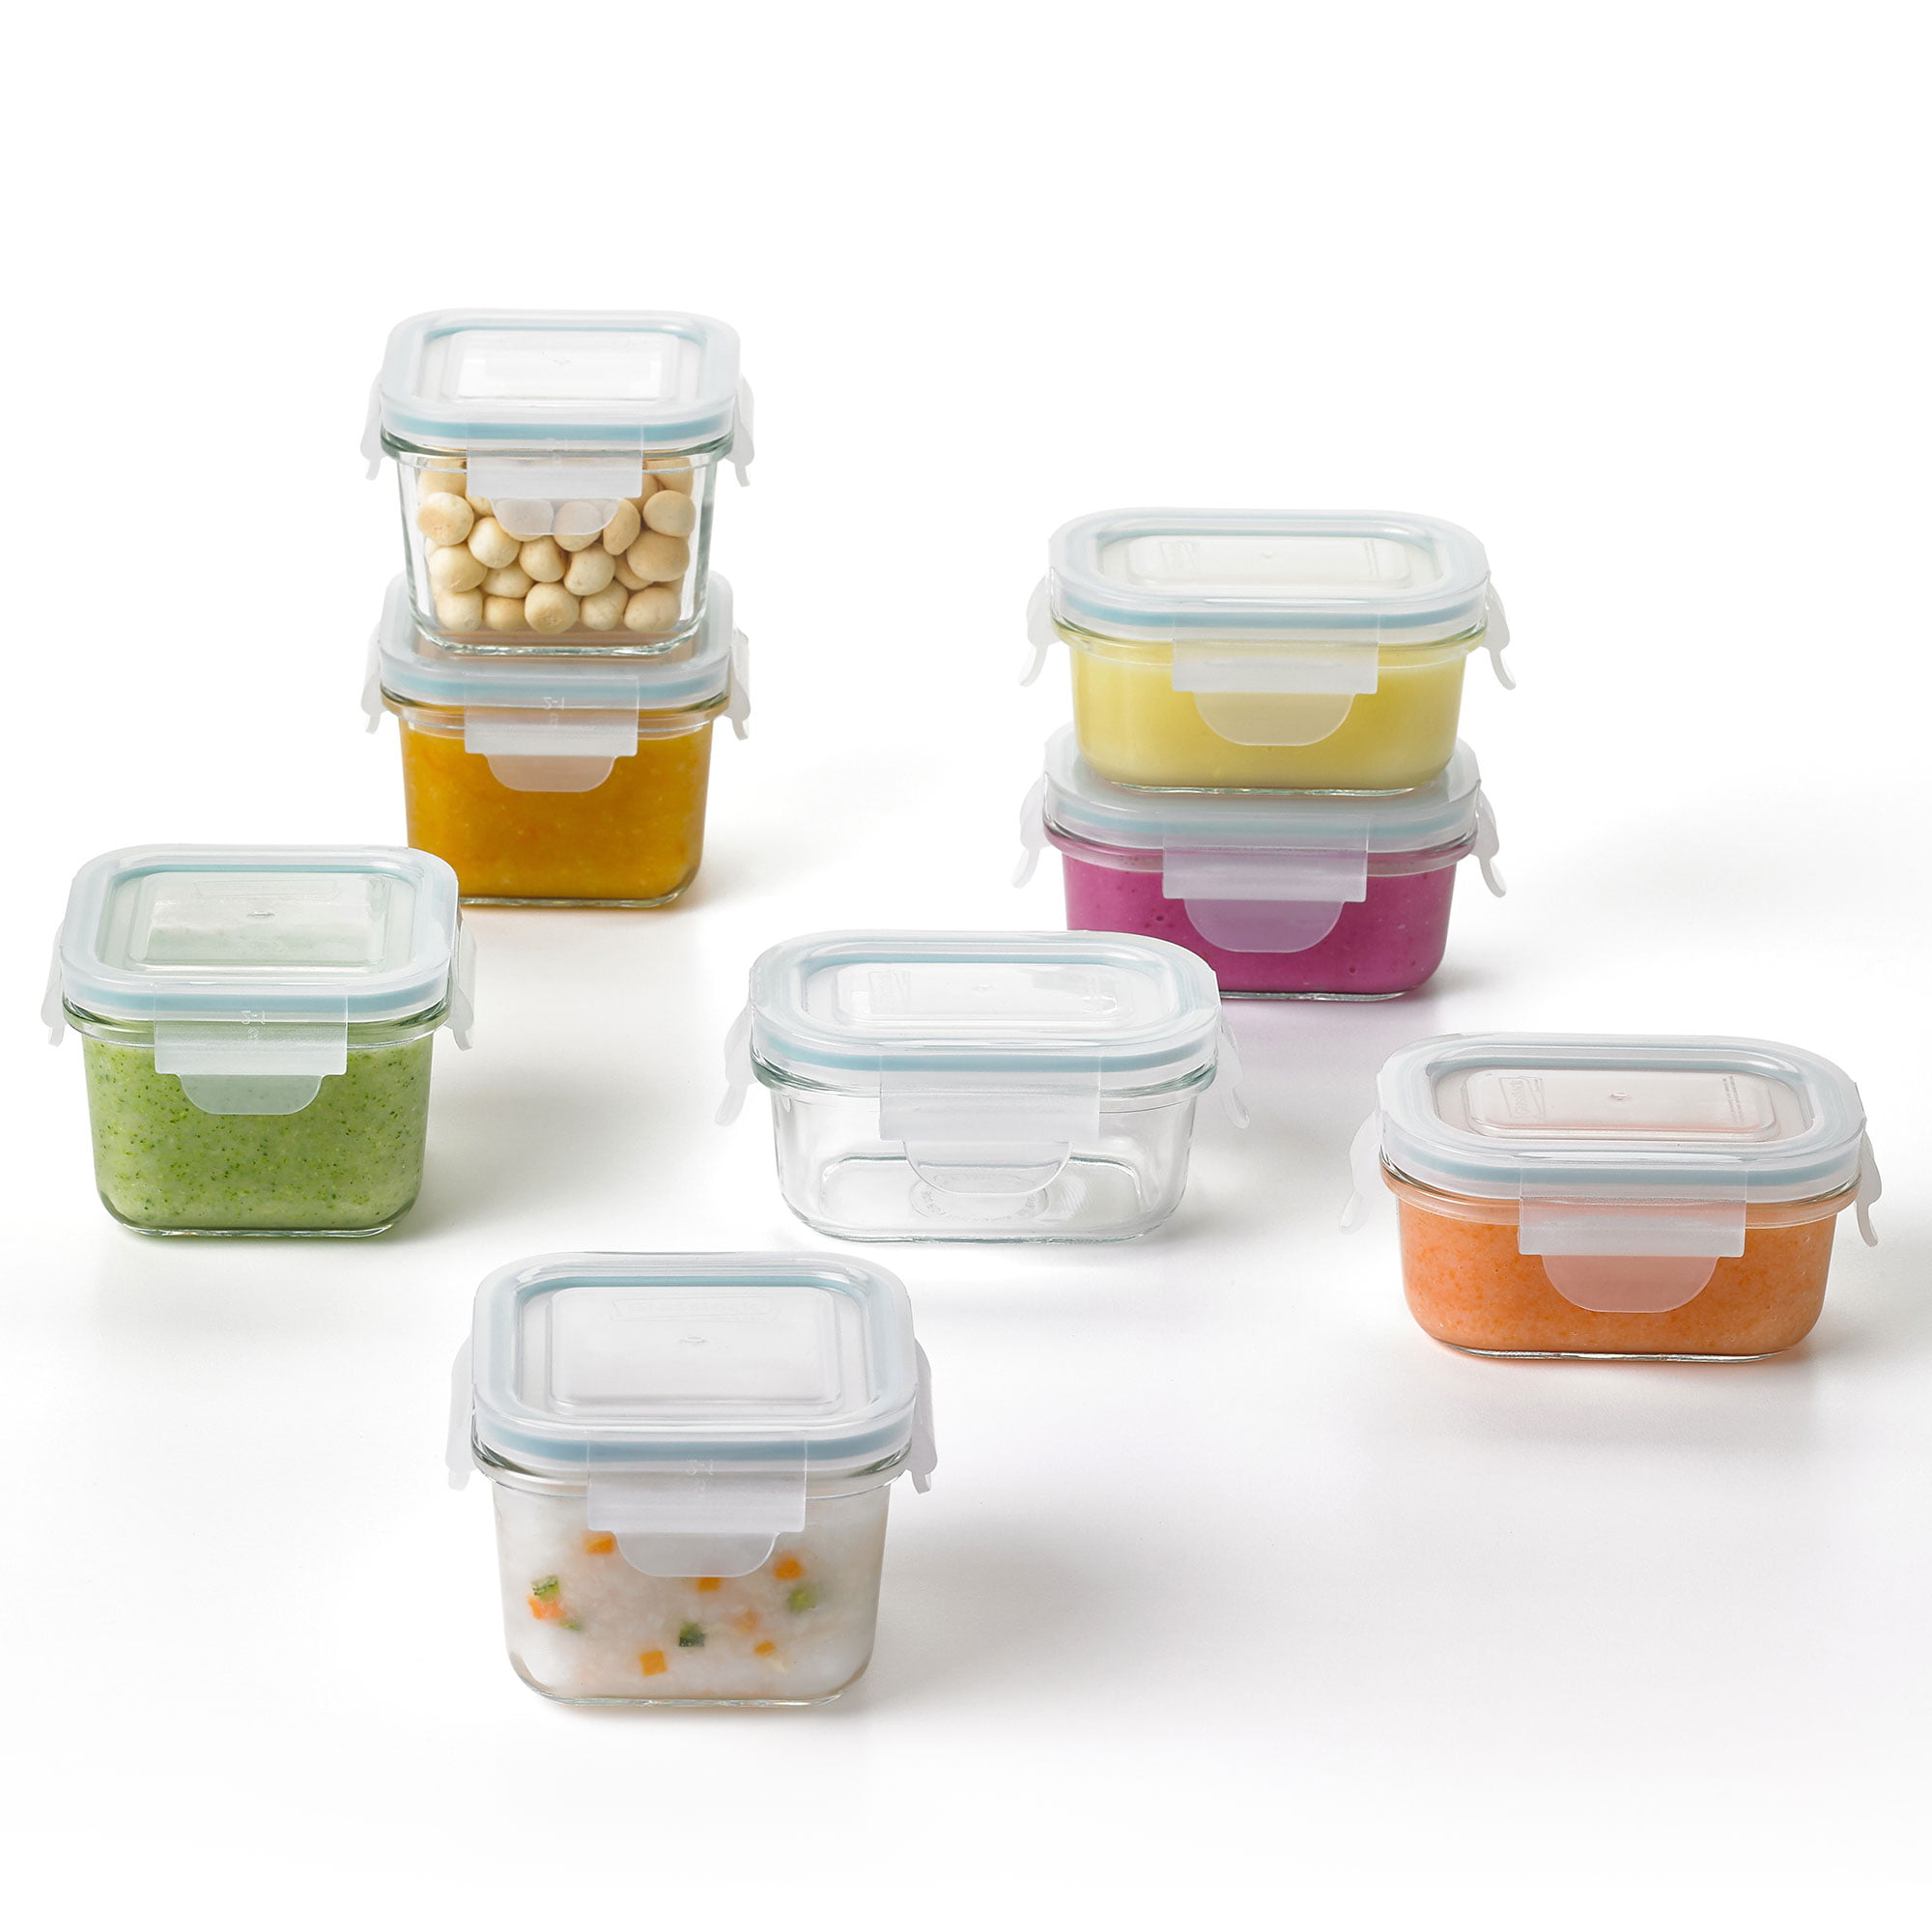 GLASSLOCK 5pcs Set Safety Tempered Glass Food Storage Container